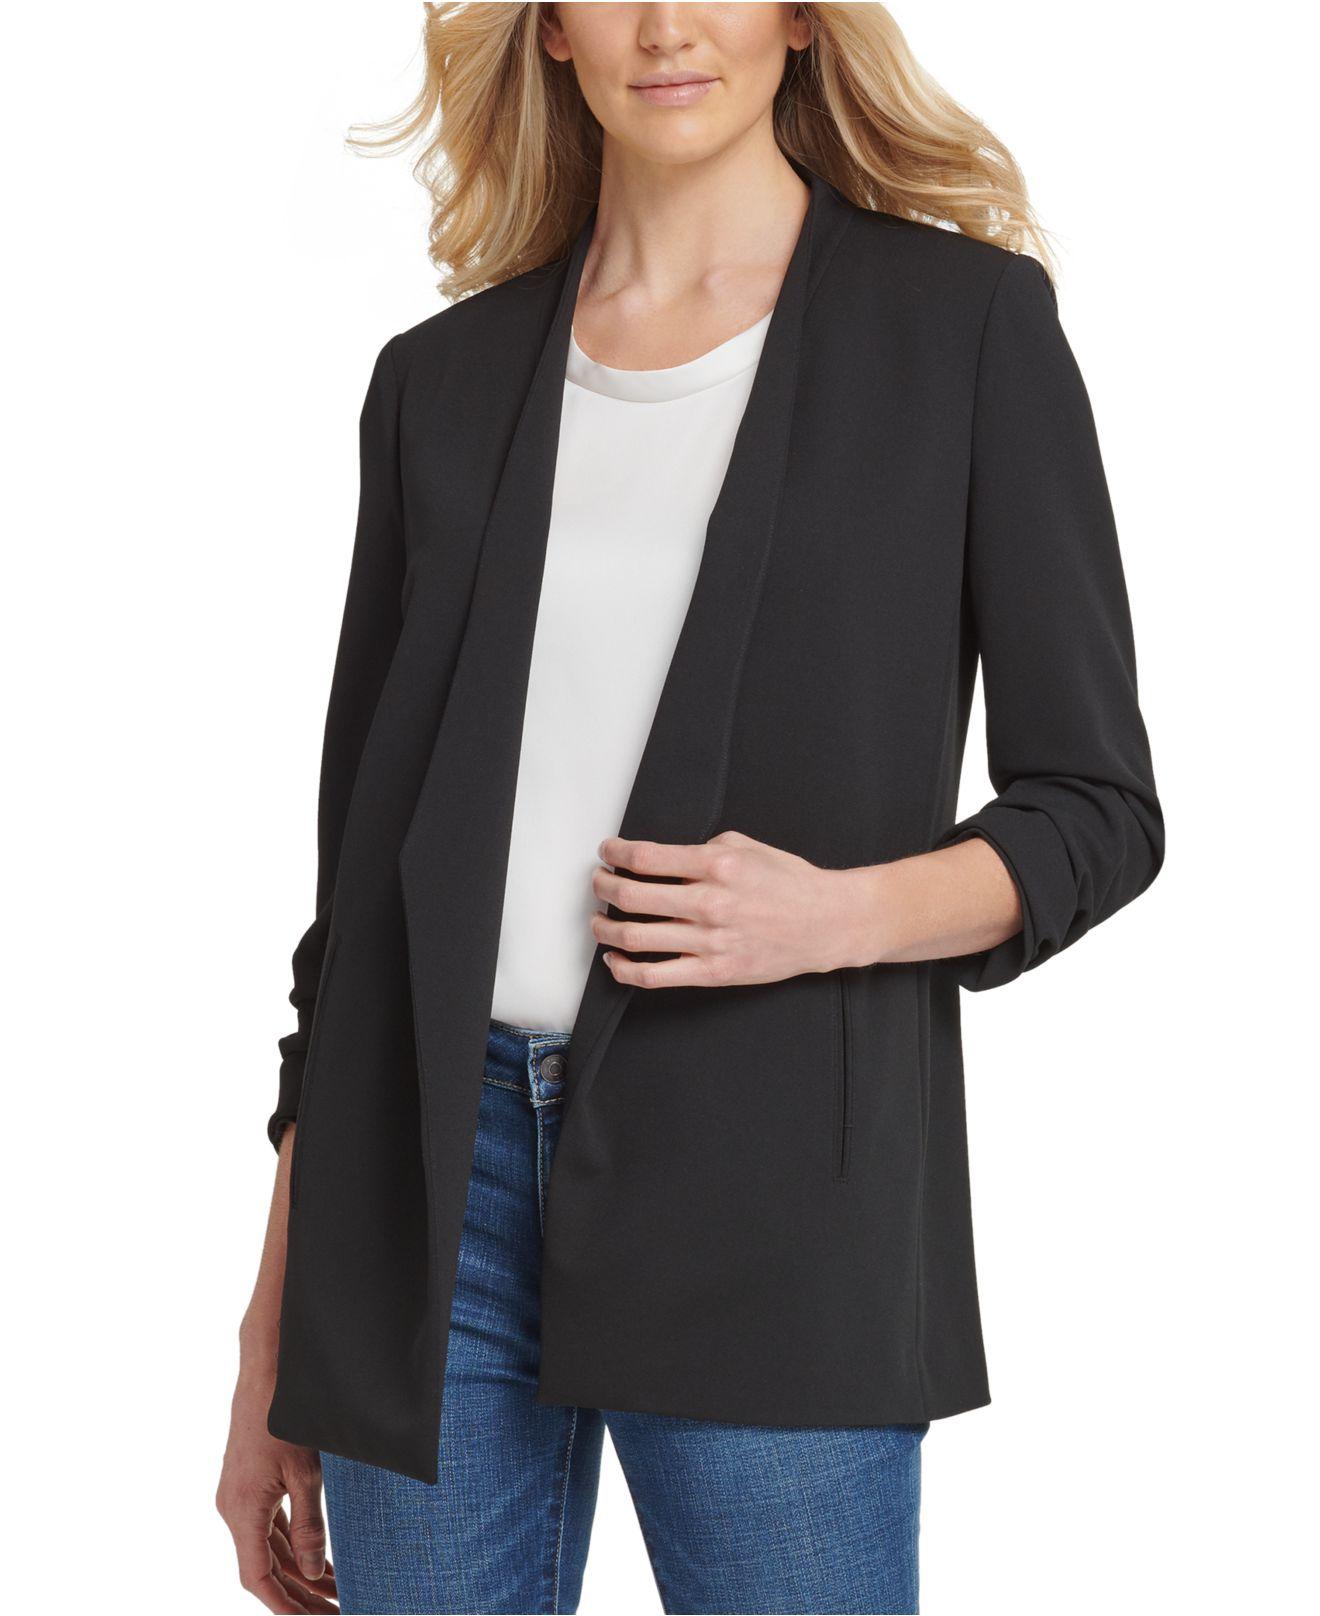 DKNY Synthetic Foundation Open-front Jacket in Black - Lyst